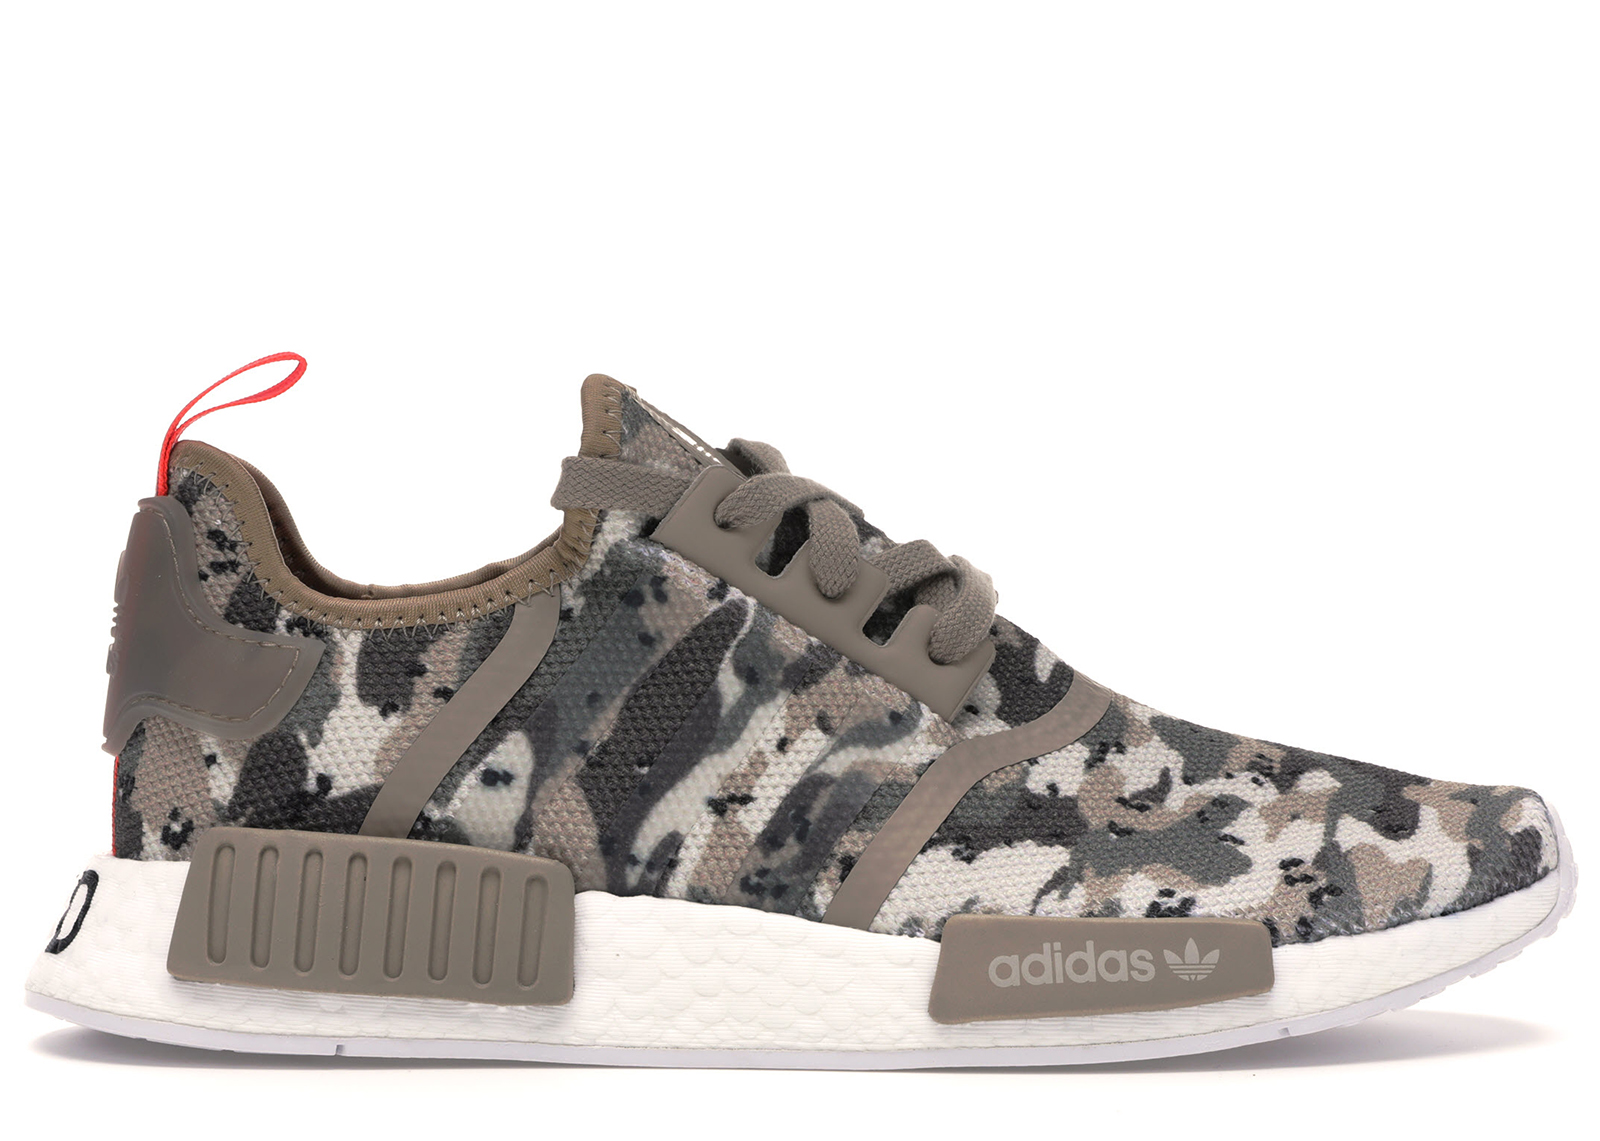 adidas nmd clear brown